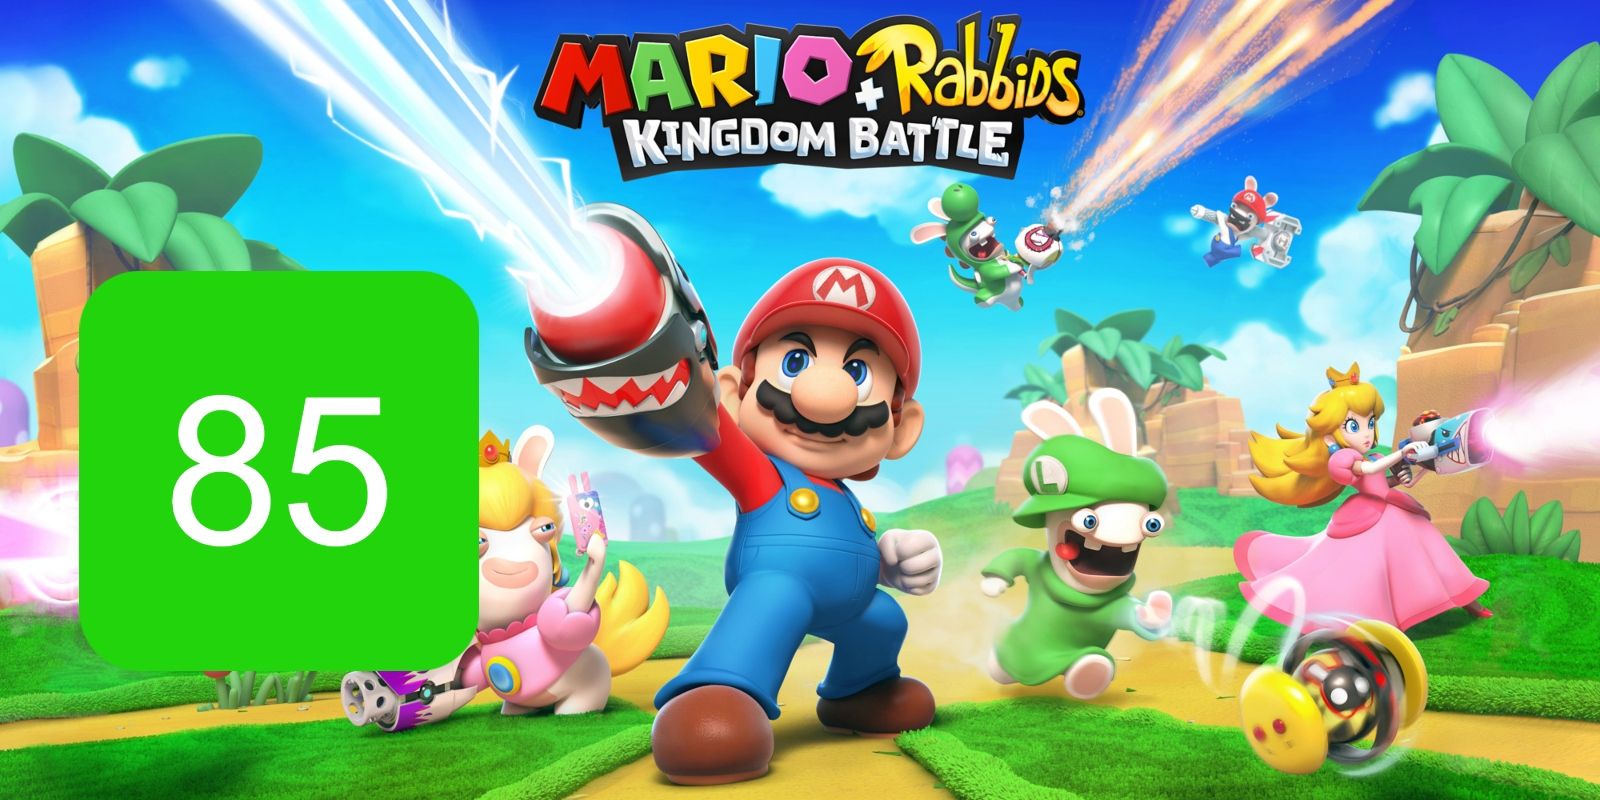 The Metascore for Mario + Rabbids Kingdom Battle on Switch, featuring the characters from the game